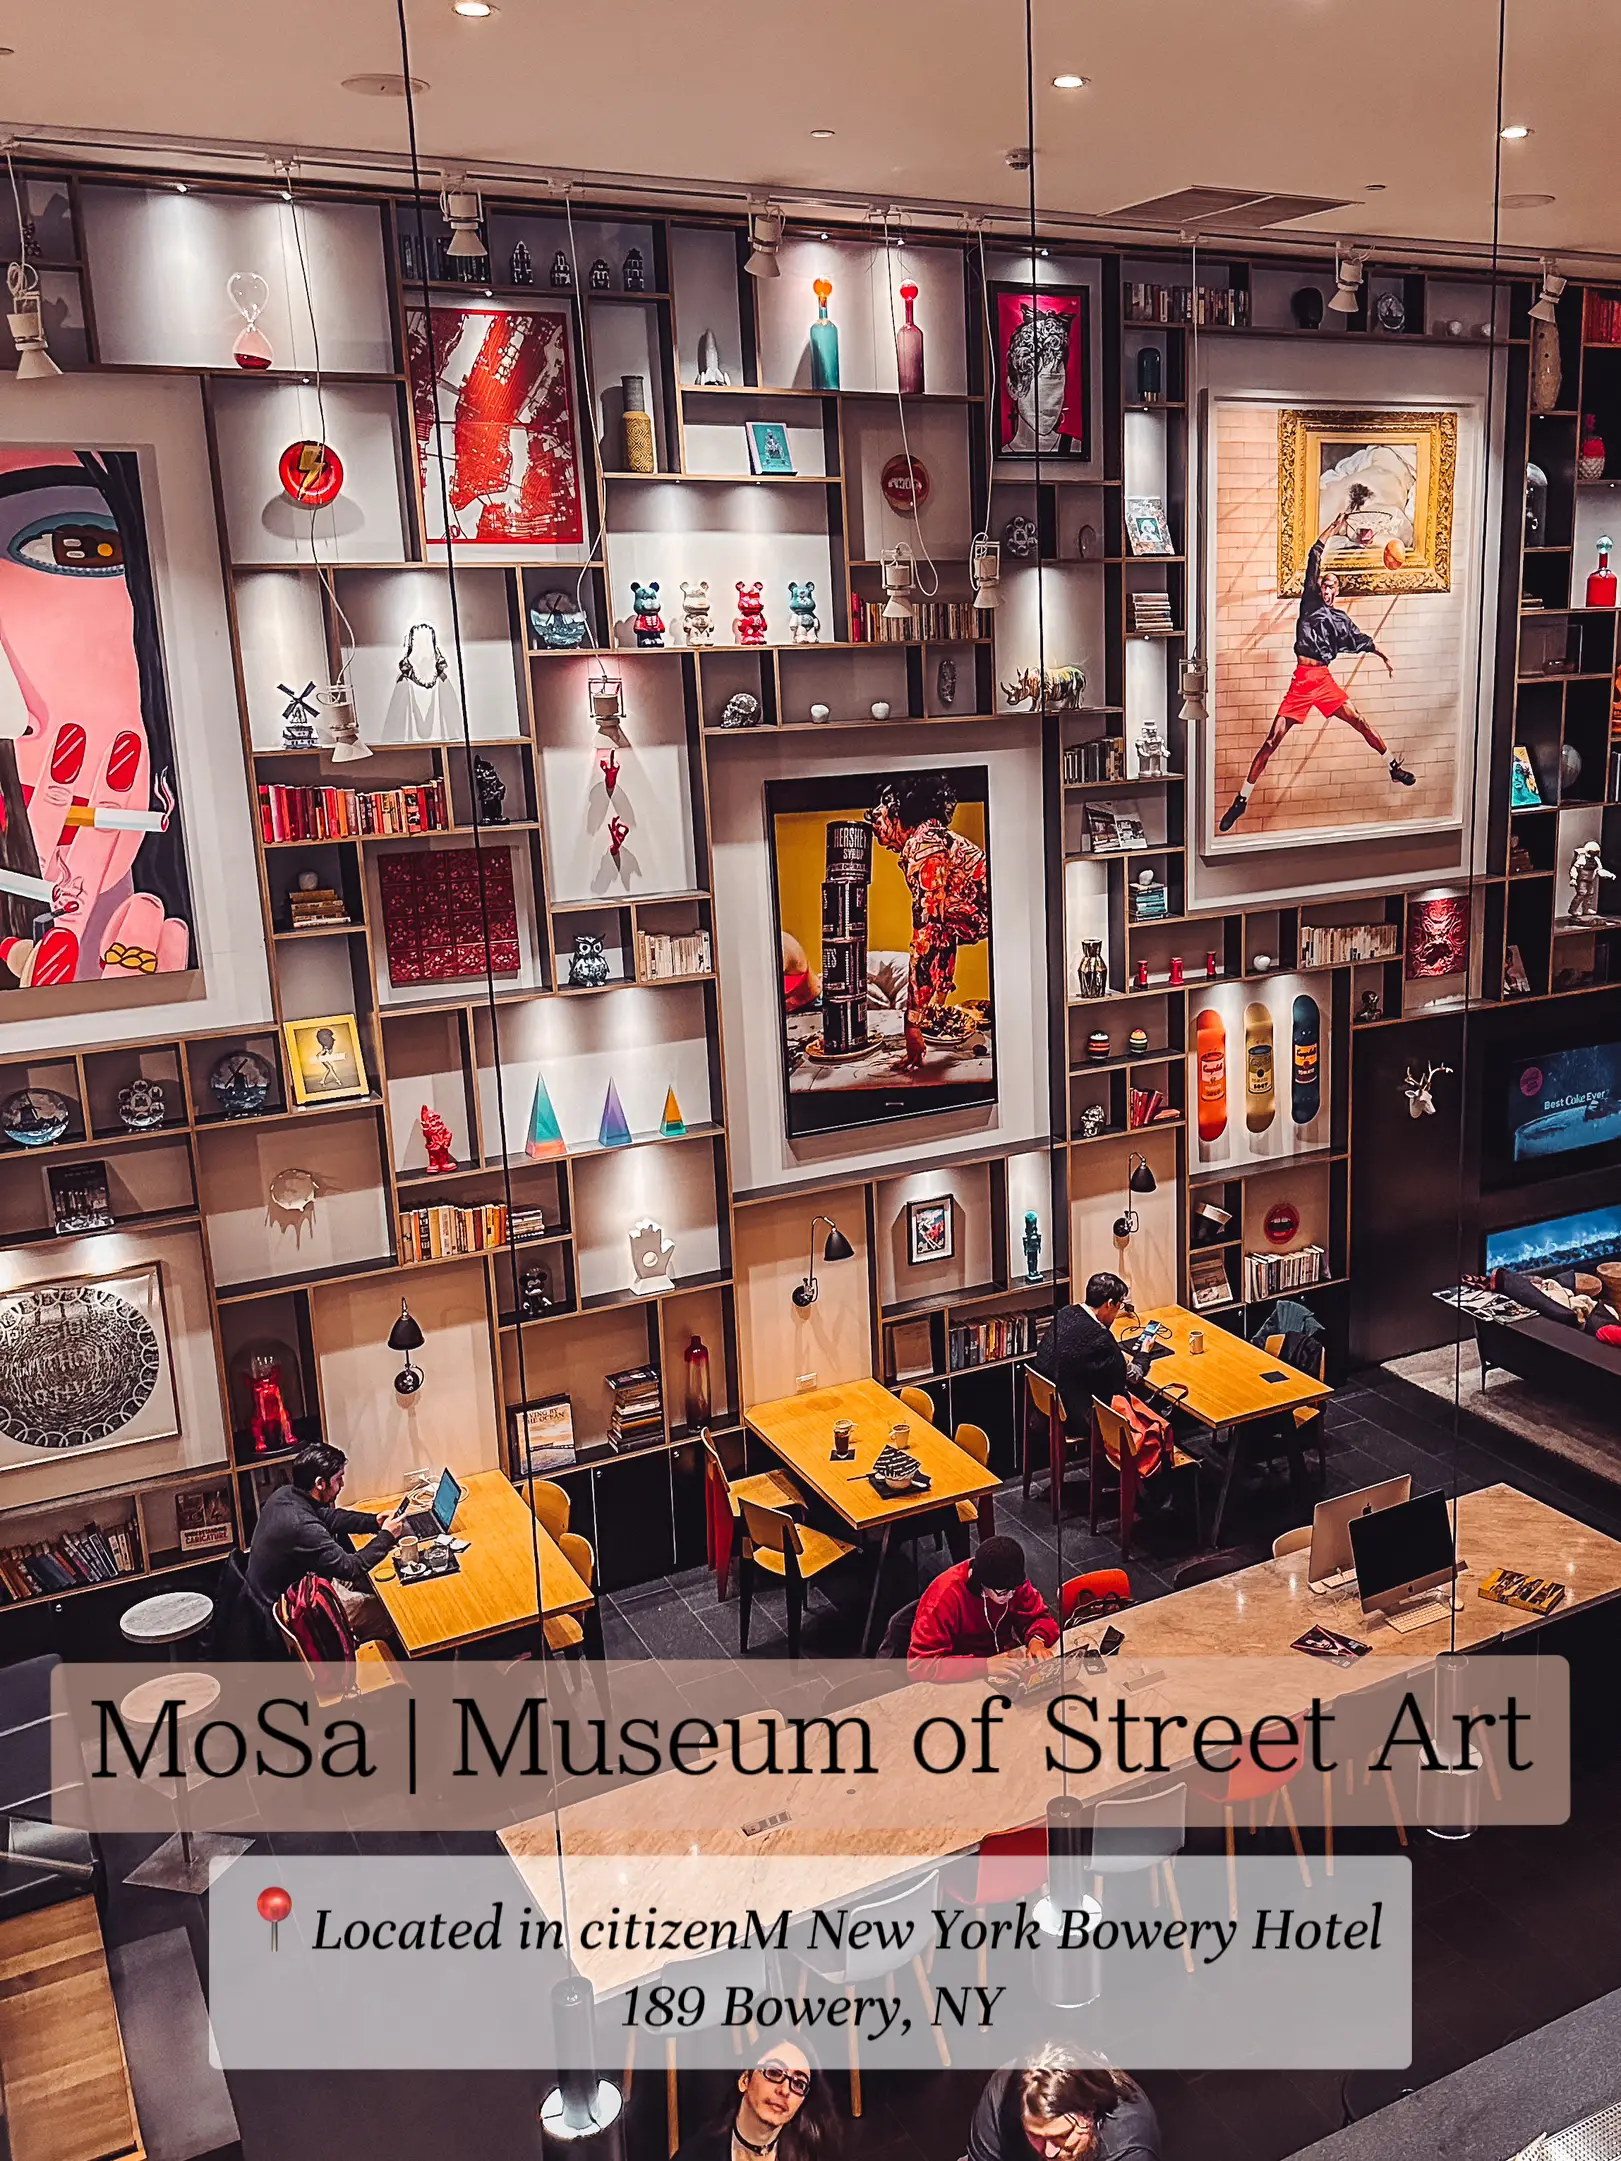  A museum of street art is displayed in a room with a table and chairs.